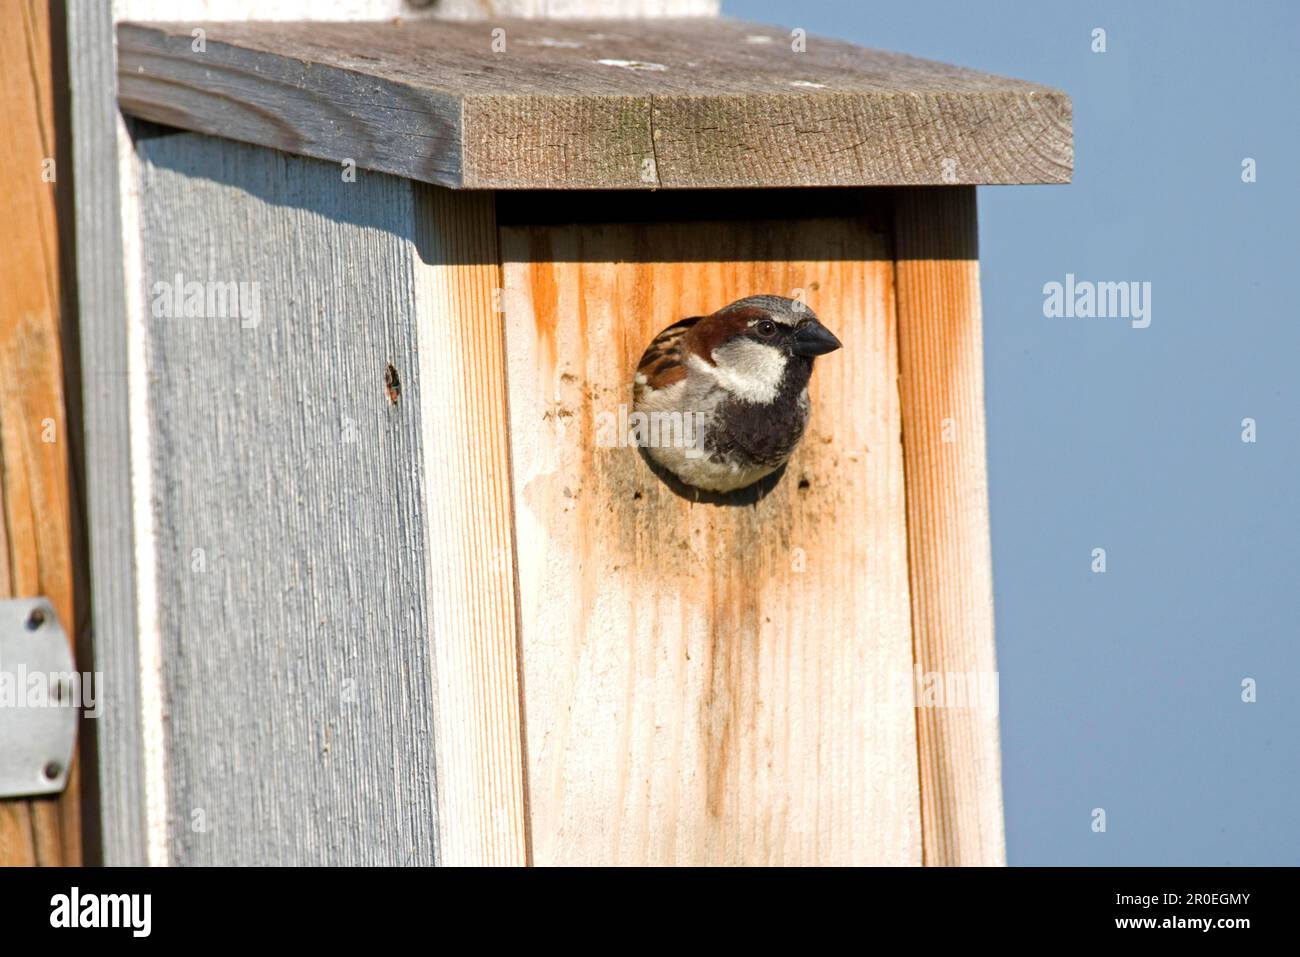 House sparrow (Passer domesticus) introduced species, adult male, at the entrance to the utricularia ochroleuca (U.) (U.) S. A Stock Photo